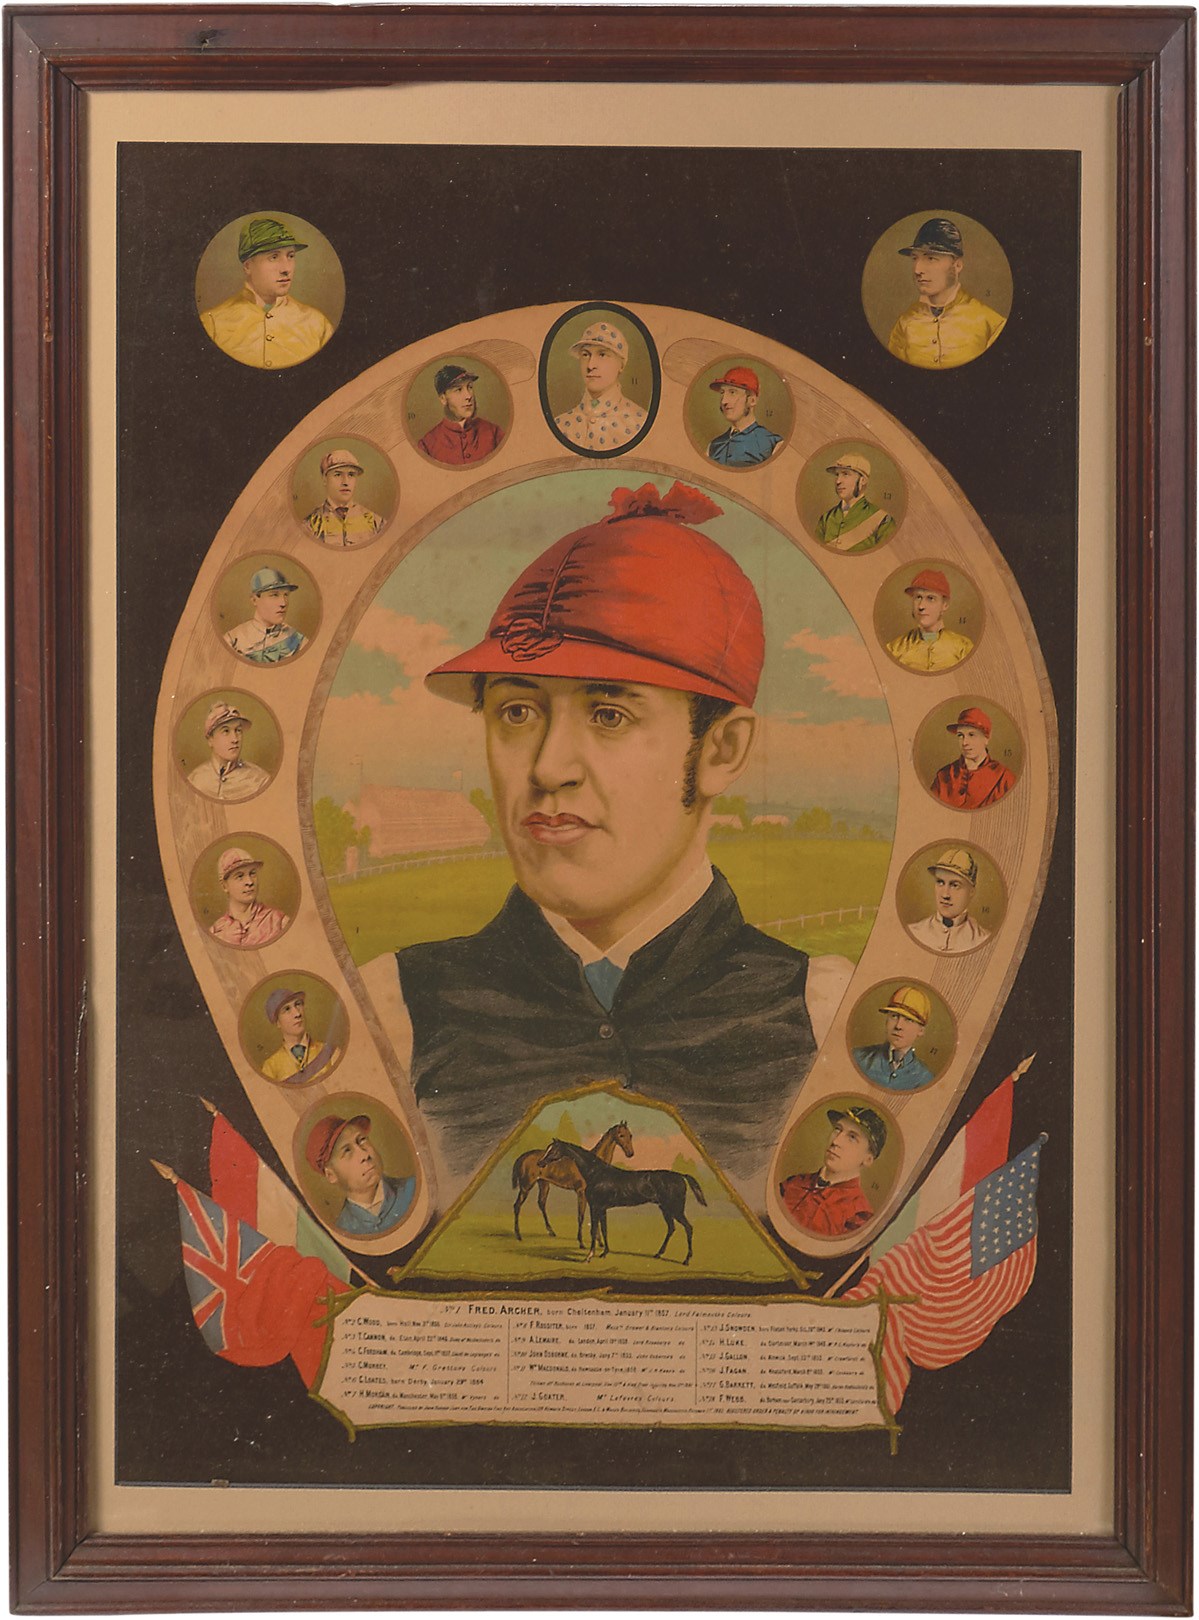 Horse Racing - 1882 Fred Archer & World's Greatest Jockeys Huge Lithograph - Only One Known